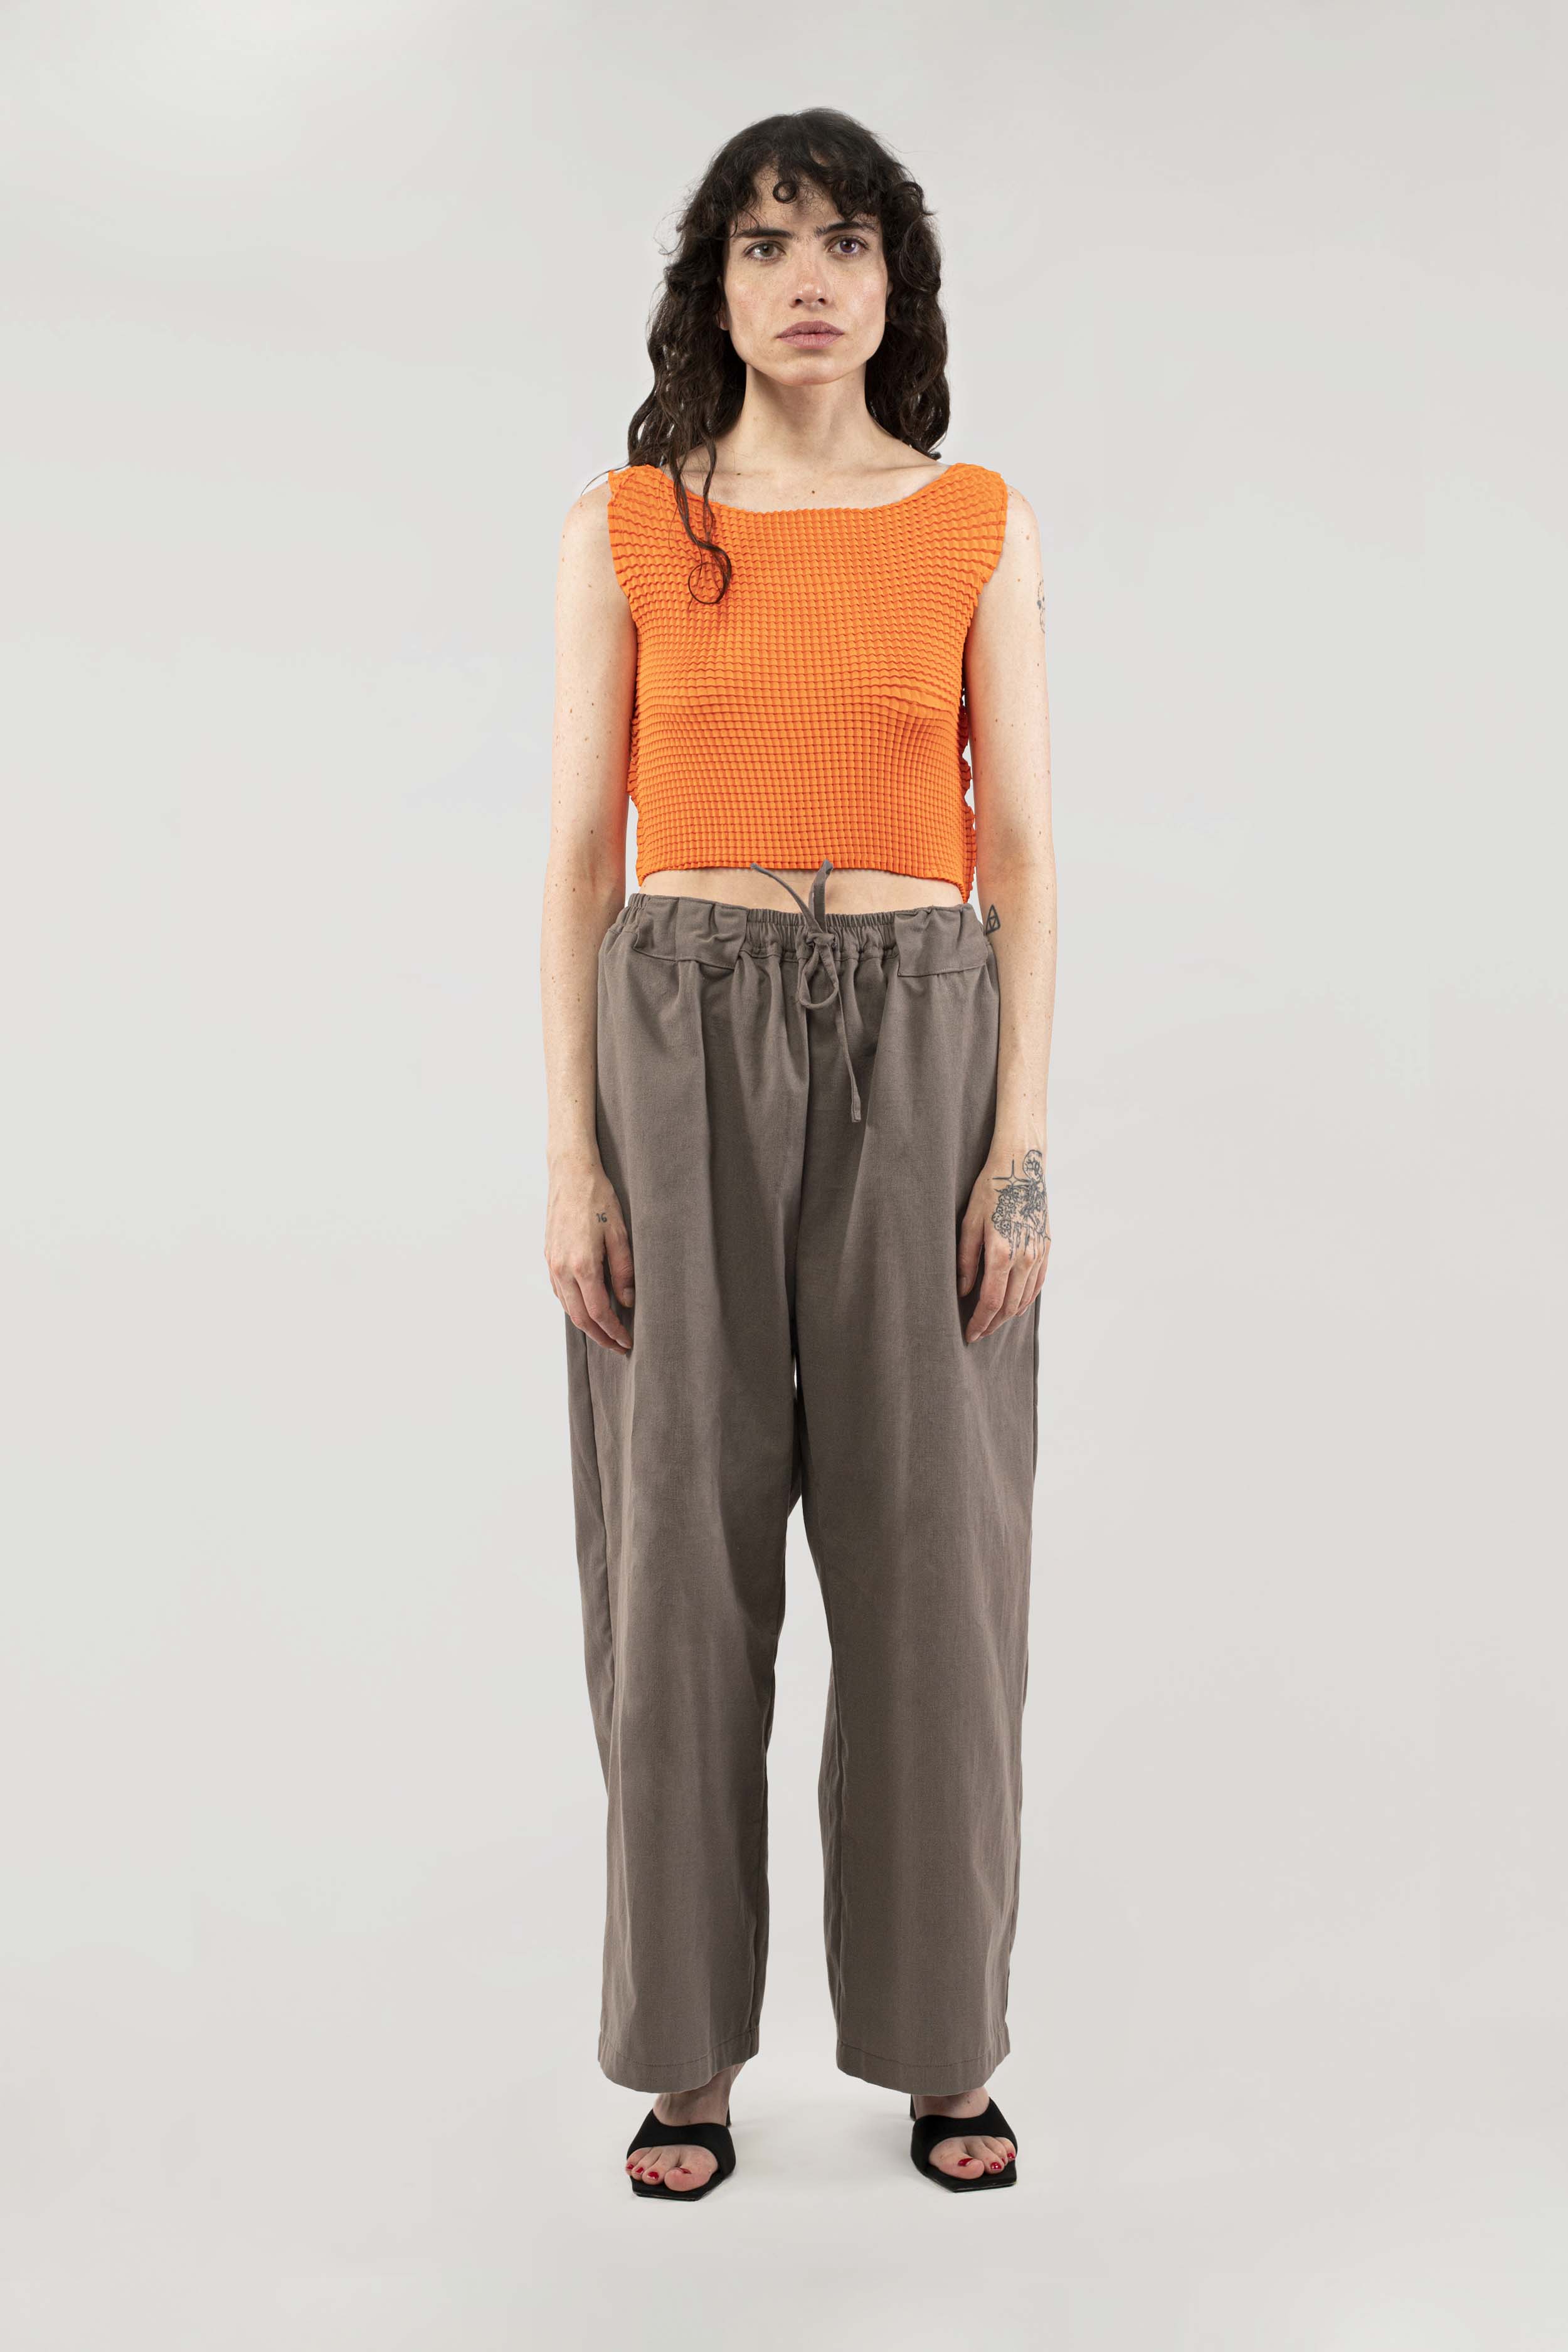 PIPE AND ROW Boutique - We'll track the NIN STUDIO SWIRL TOP